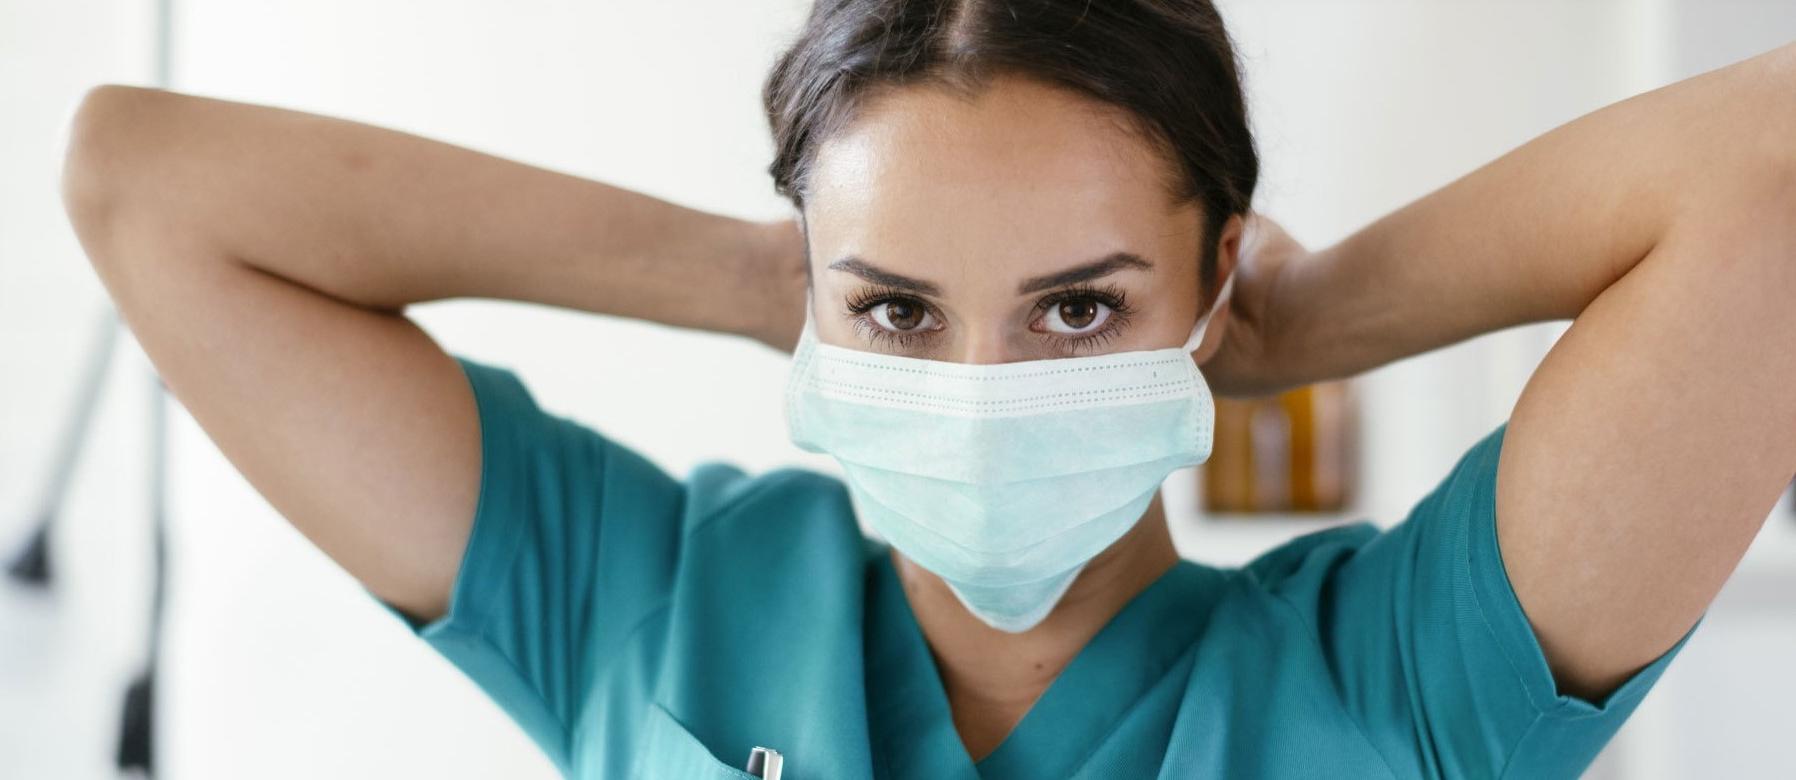 A female licensed practical nurse is wearing scrubs and a mask